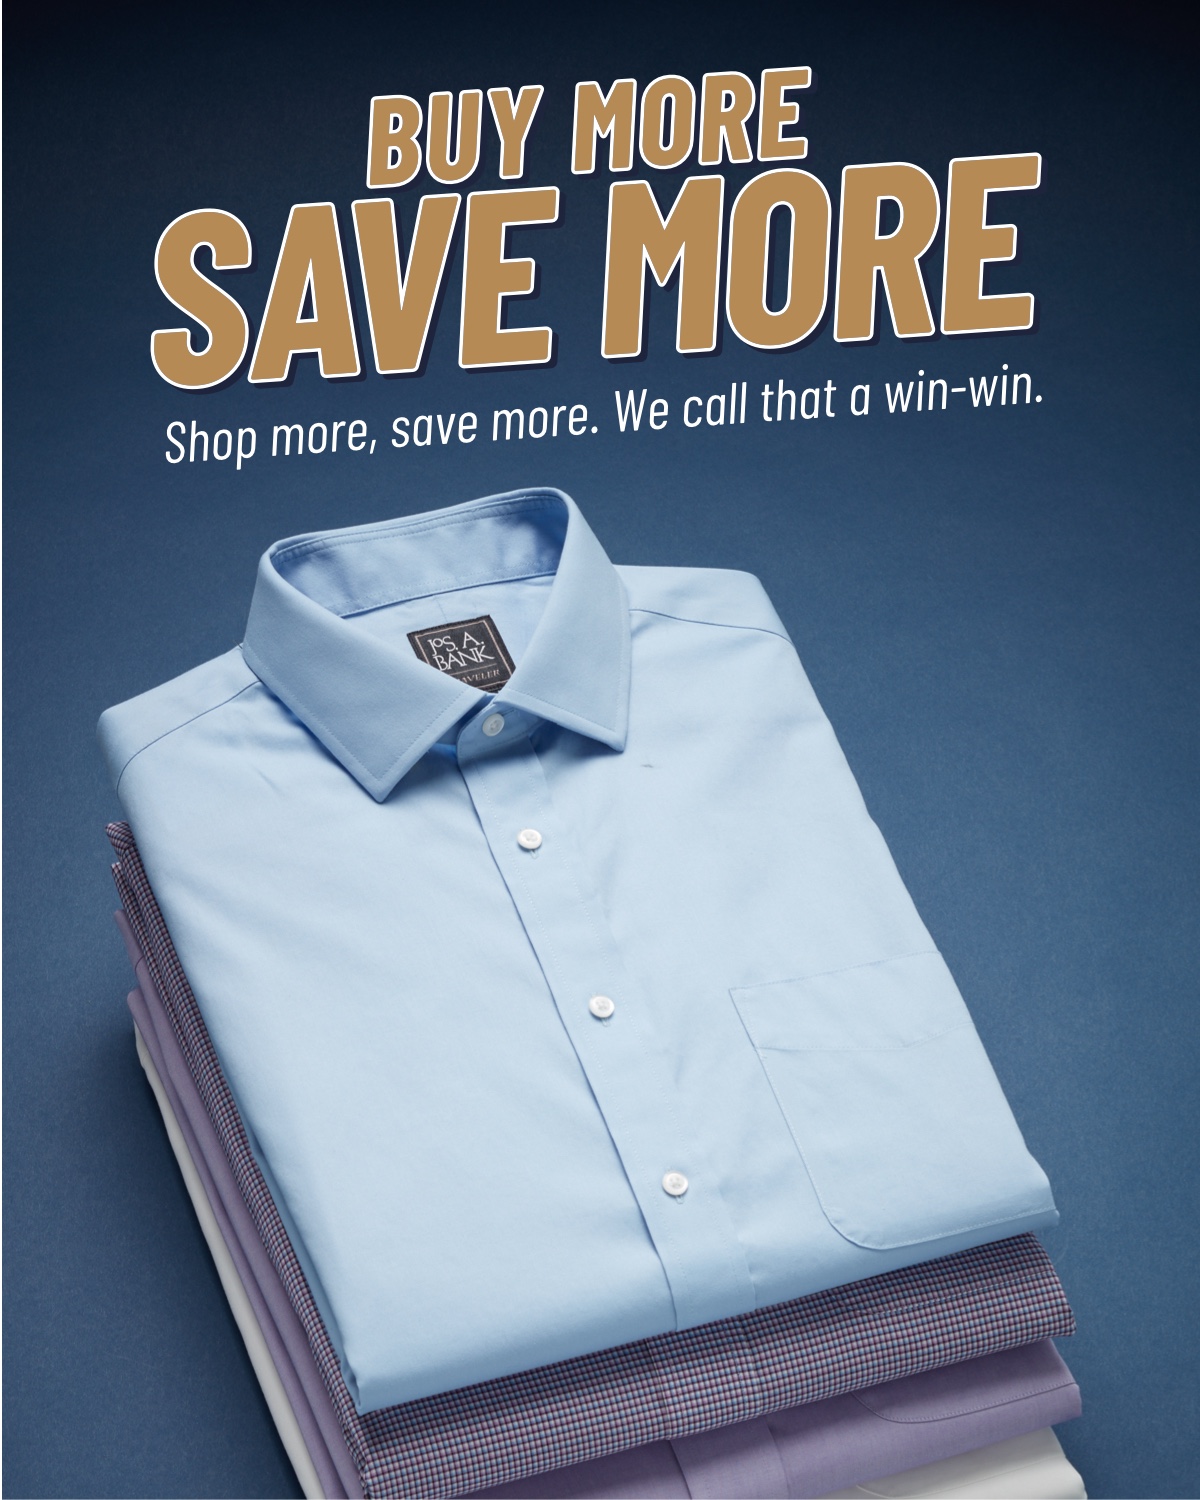 stack of dress shirts, blue background, BUY MORE SAVE MORE